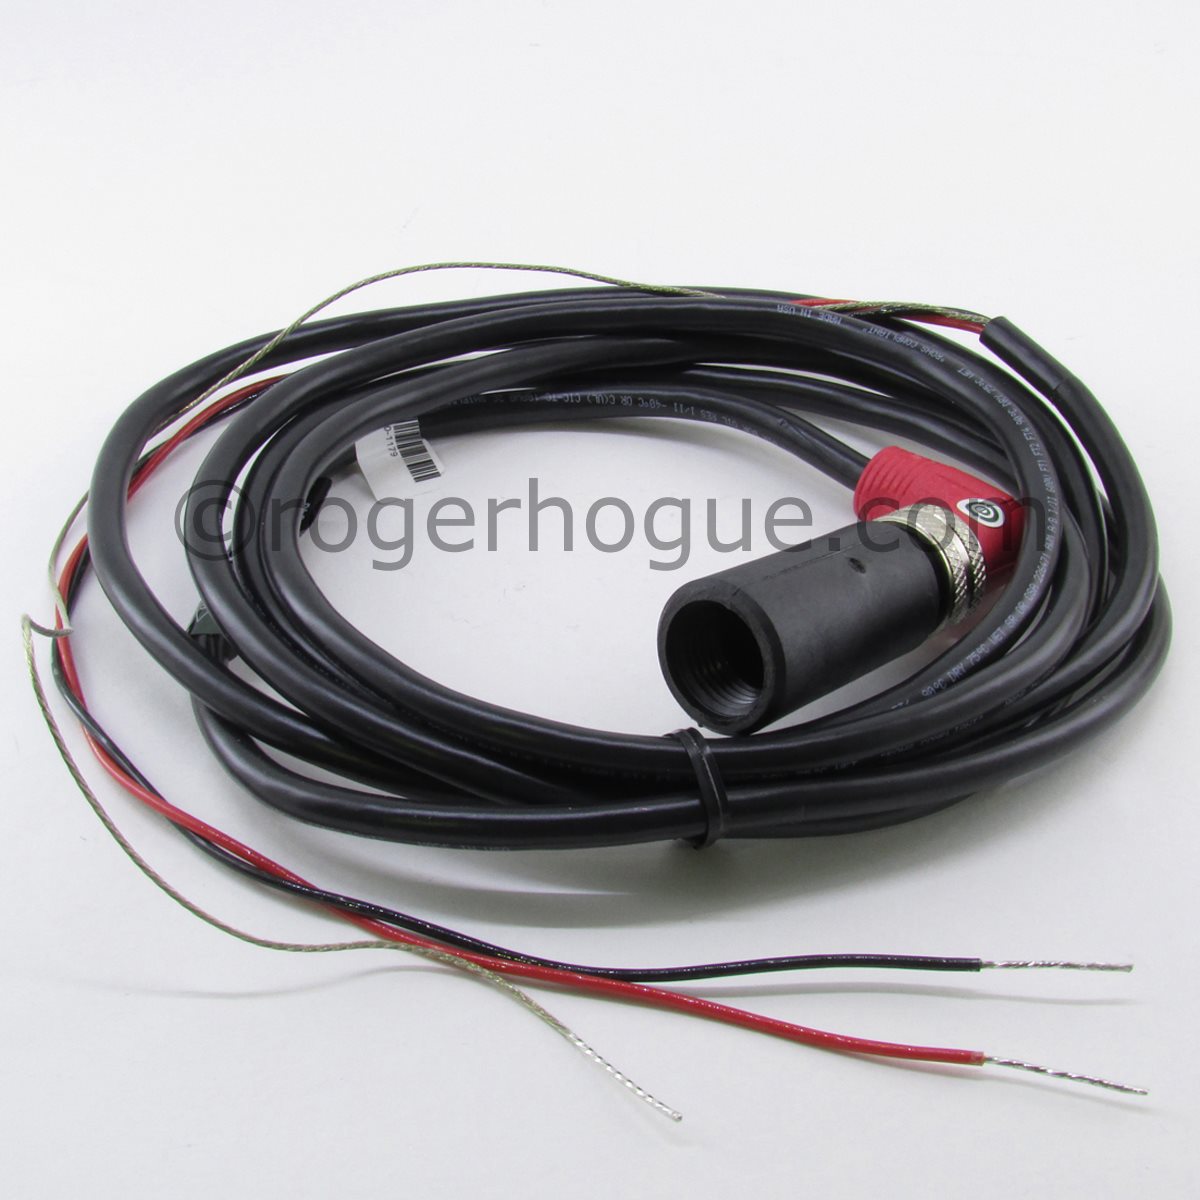 INFRARED SCANNER (IR) 90 DEGREE HEAD 8' CABLE